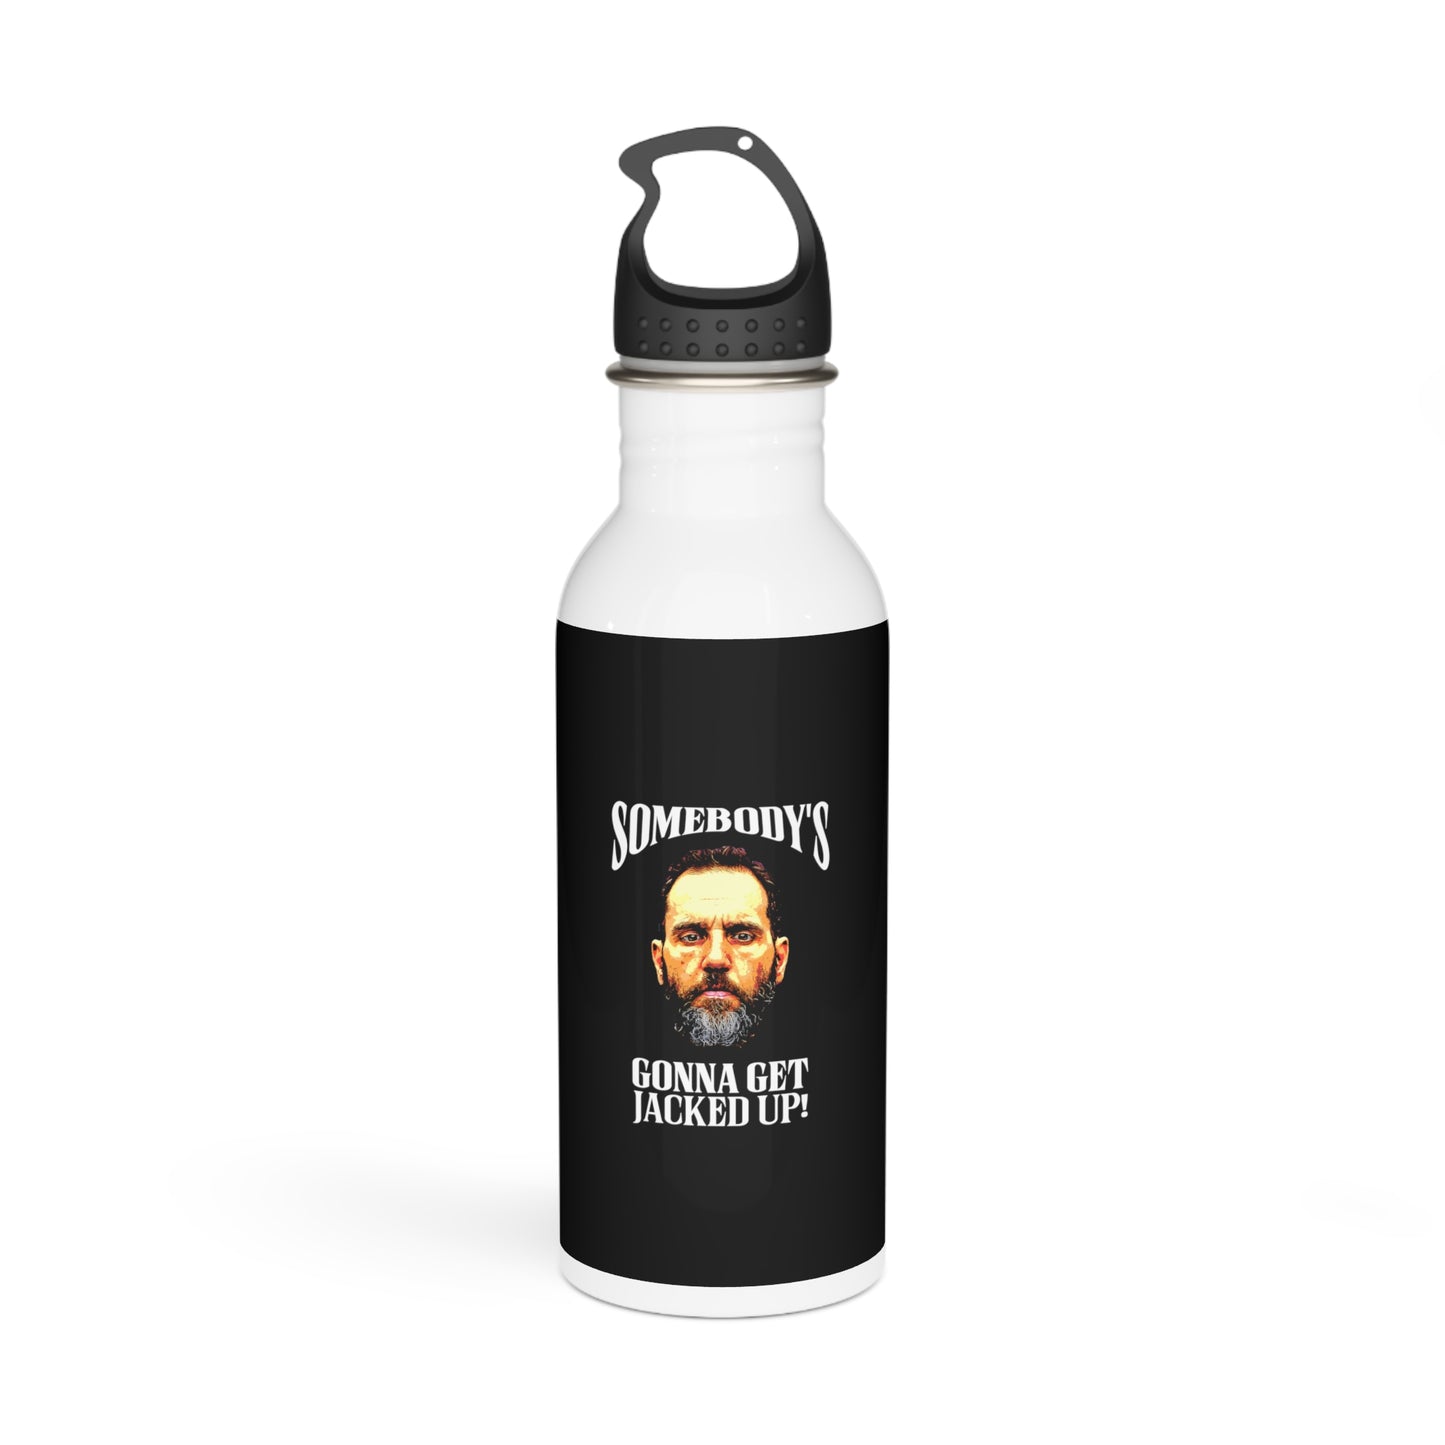 SOMEBODY'S GONNA GET JACKED UP! - Stainless Steel Water Bottle